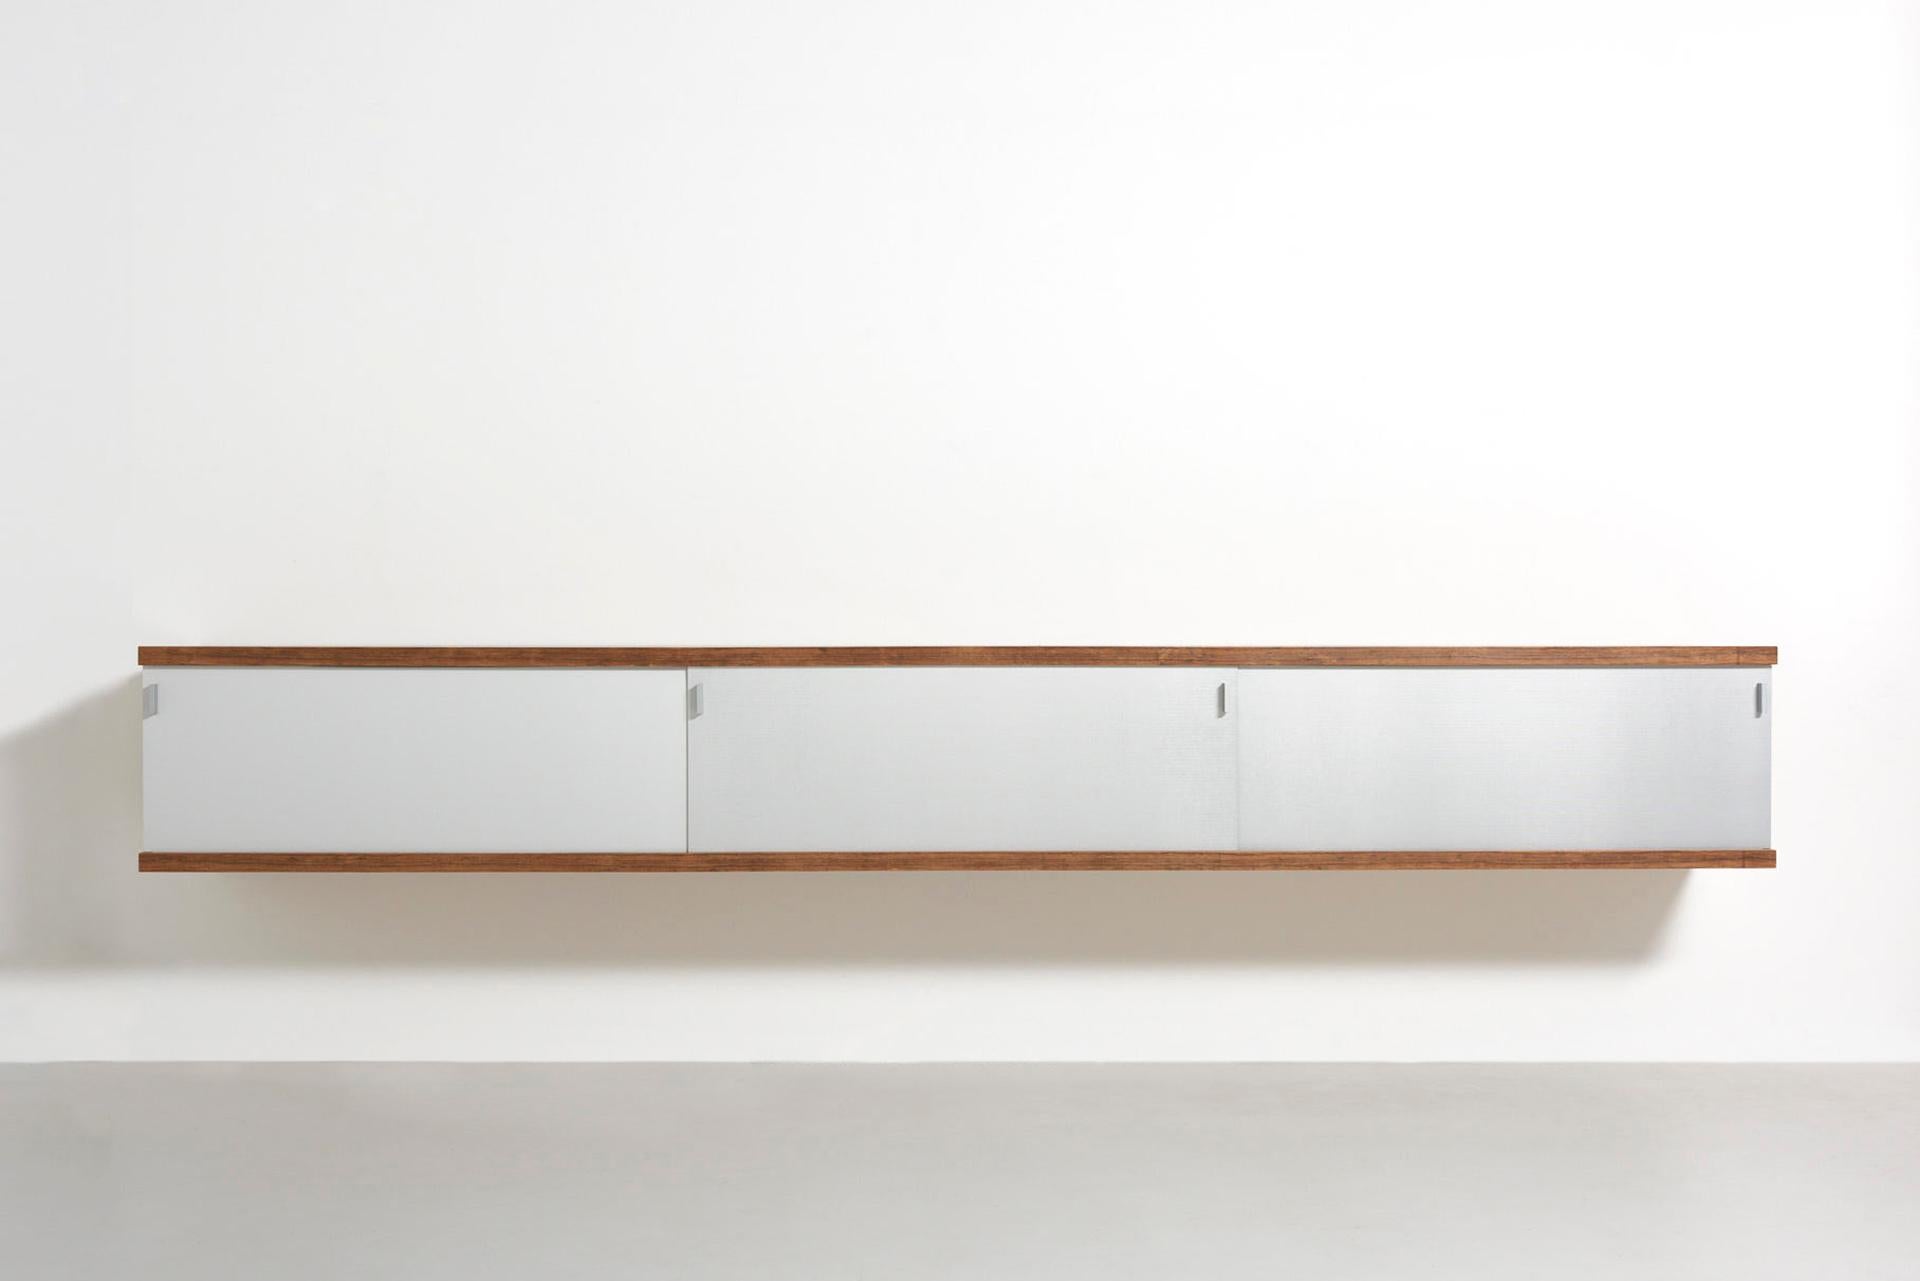 An extra large floating sideboard in rosewood with three sliding doors in ribbed aluminium. This edition is even 20cm longer than the standard long version. Designed by Horst Brüning in 1967. Made by Behr in Germany.

